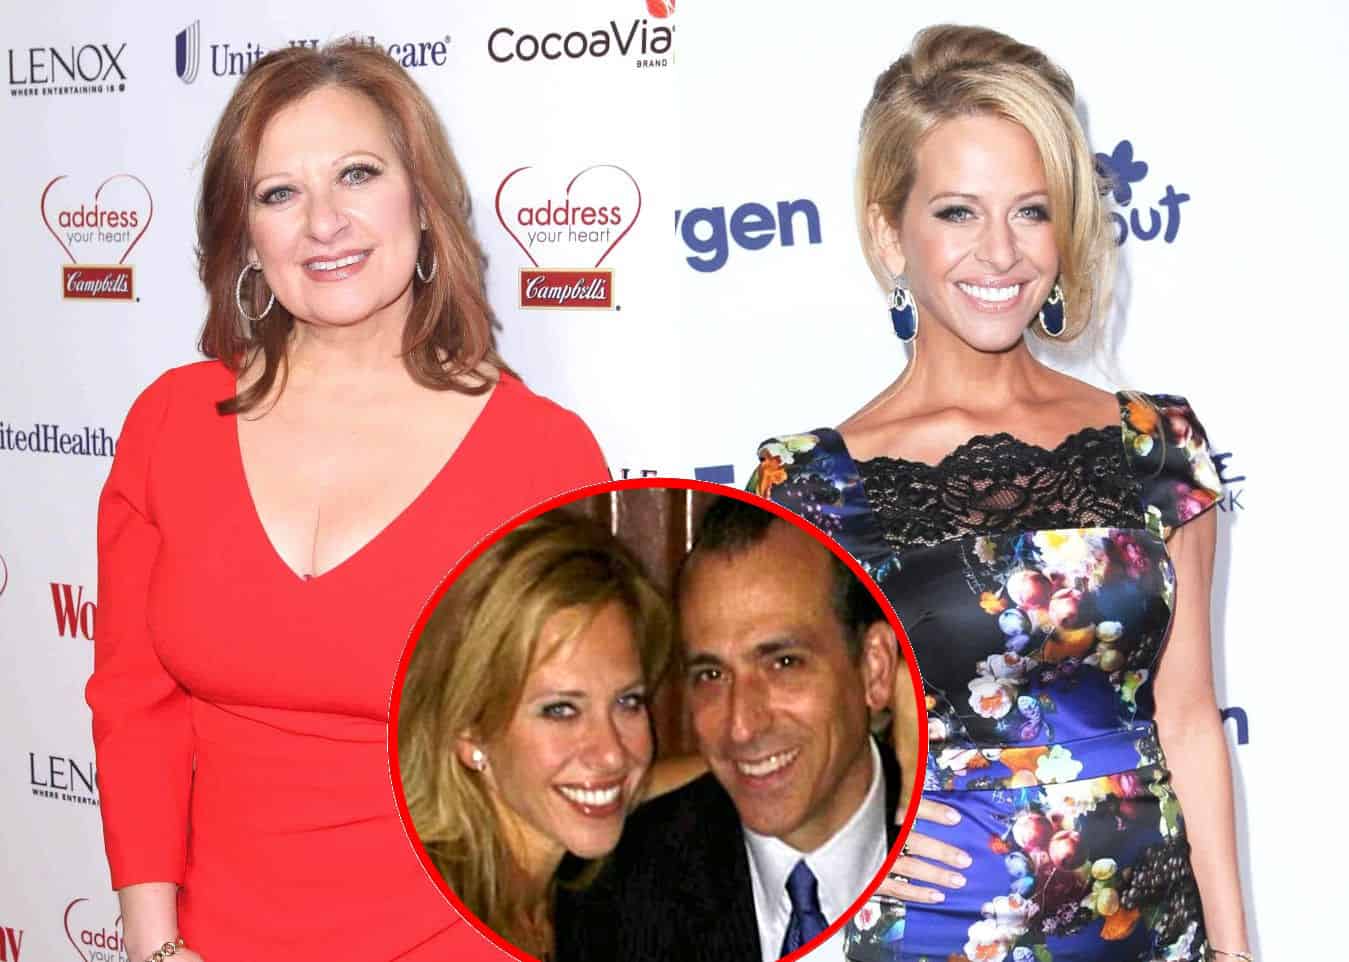 Caroline Manzo Supports Tommy Manzo After He's Accused of Attacking Her Sister Dina Manzo, RHONJ Alum Writes Letter Praising Him as "Kind" and "Caring"